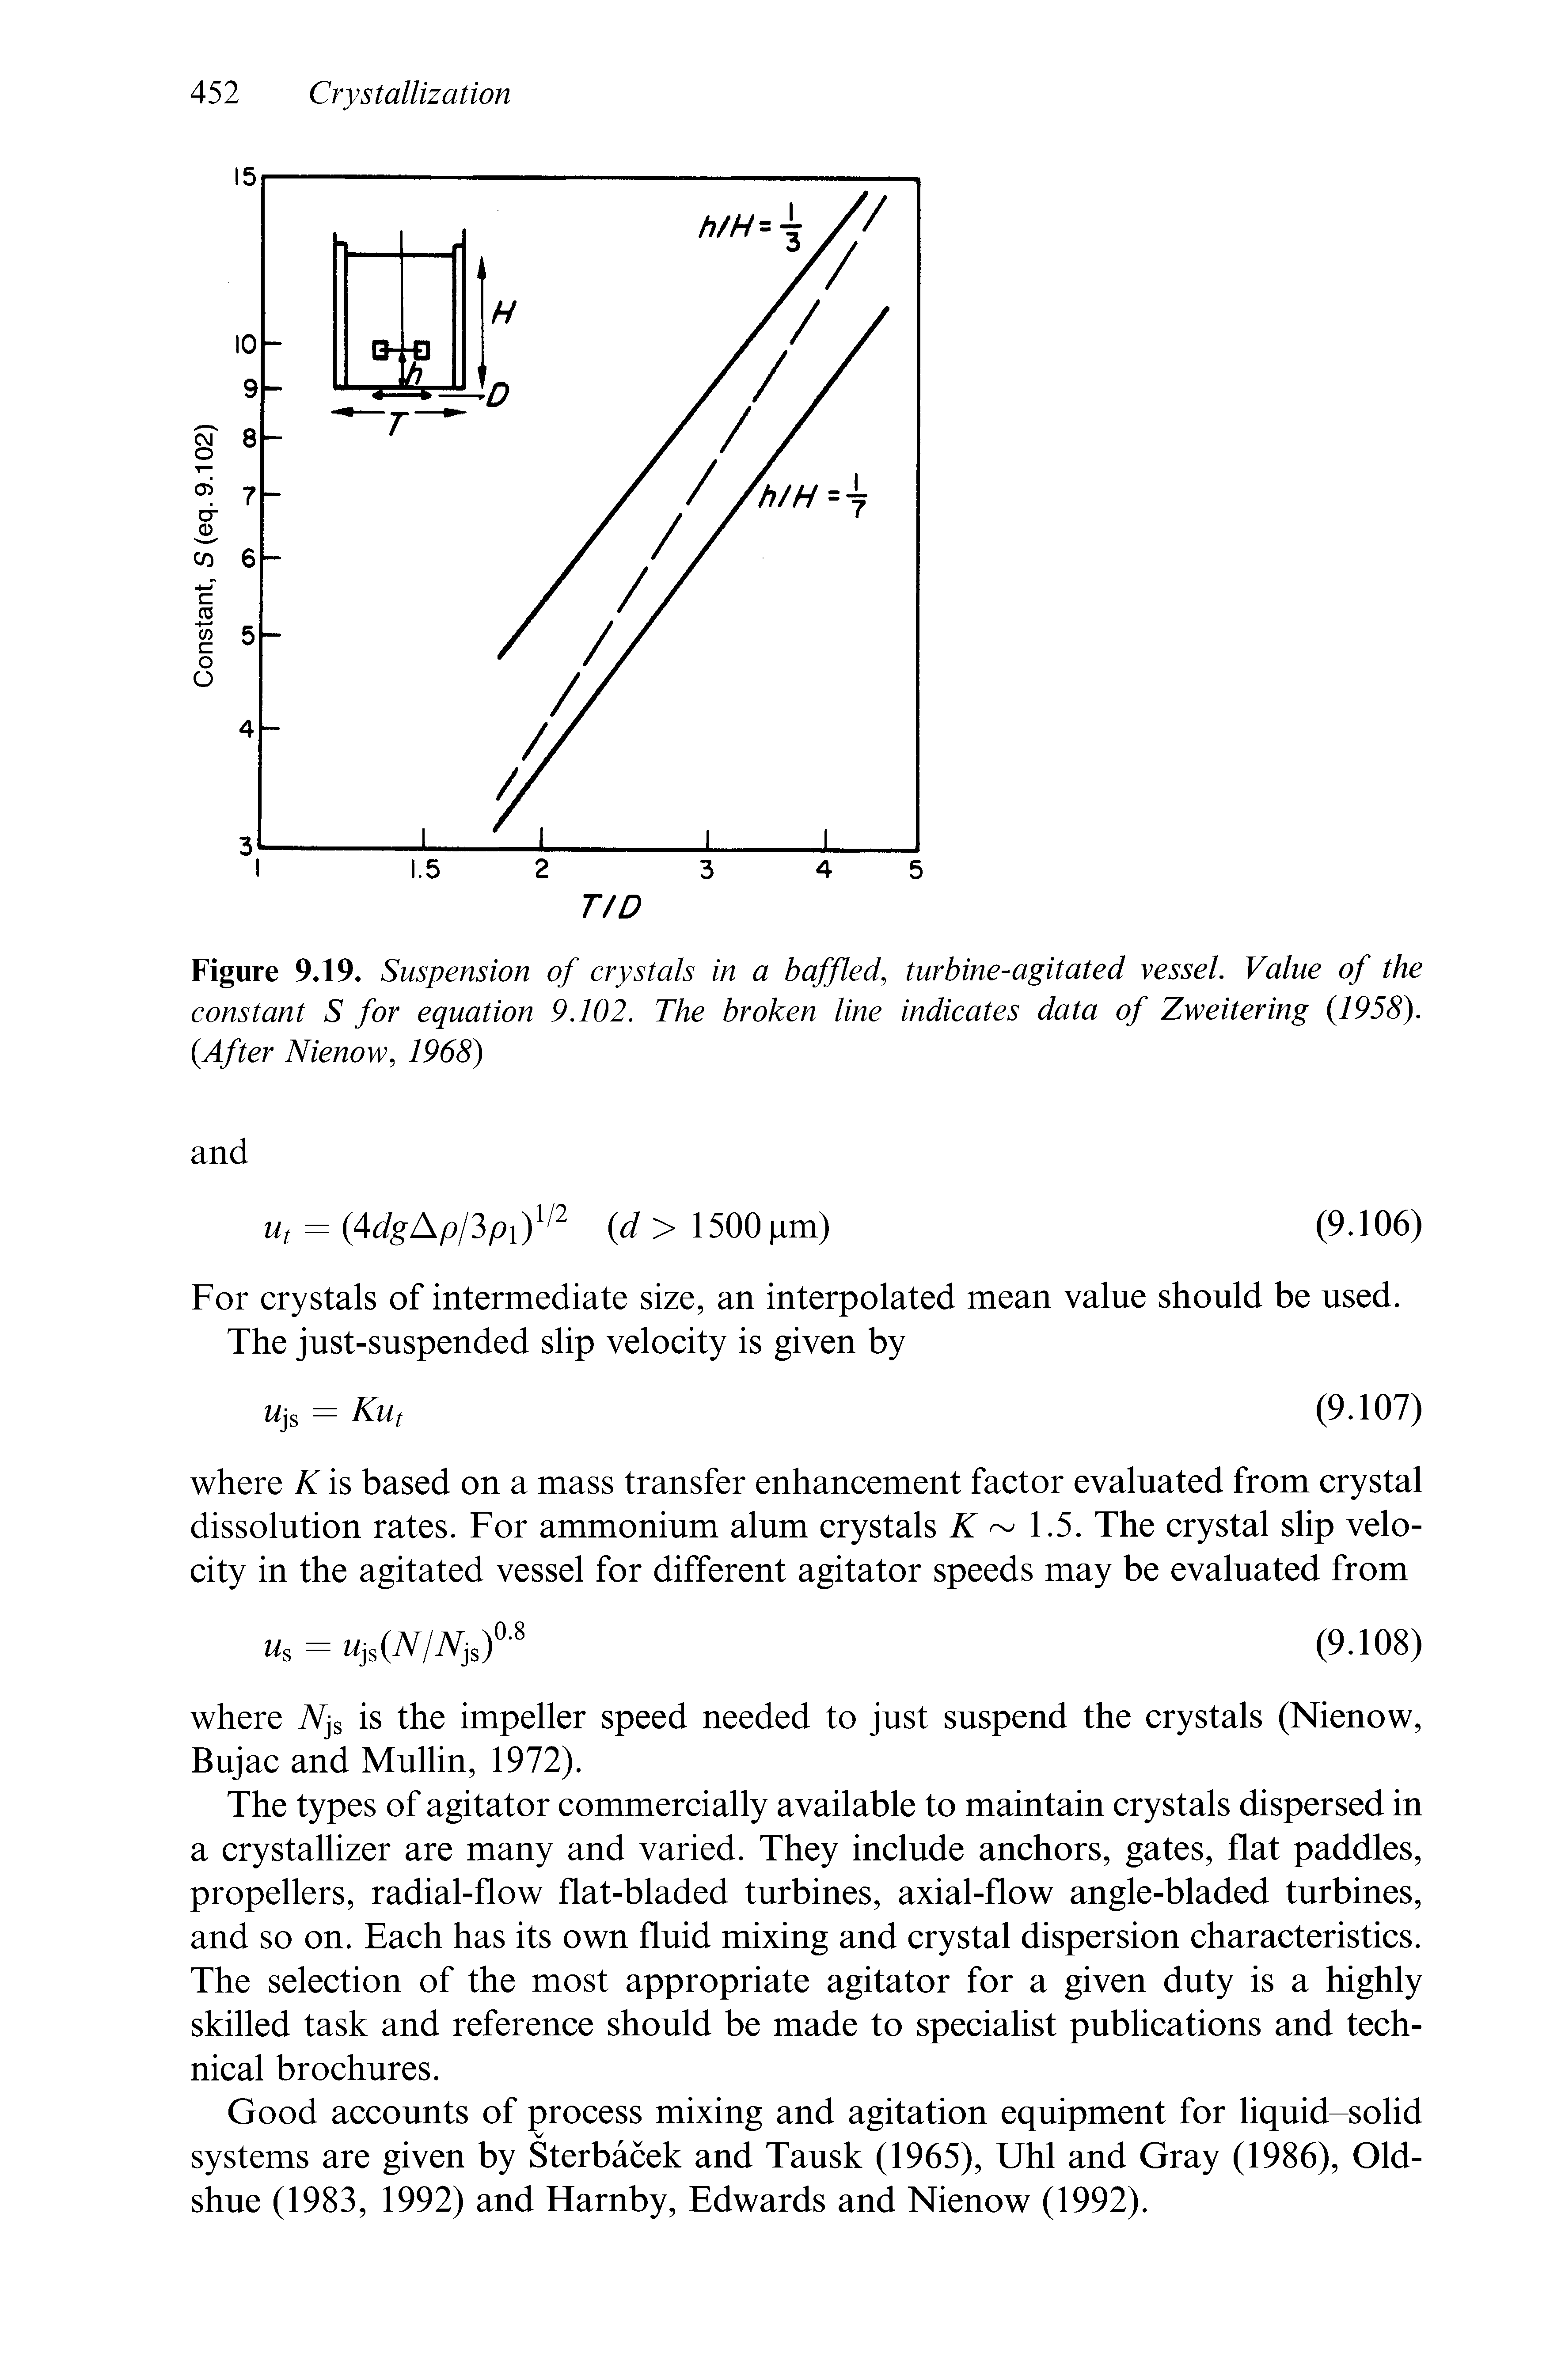 Figure 9.19. Suspension of crystals in a baffled, turbine-agitated vessel. Value of the constant S for equation 9.102. The broken line indicates data of Zweitering (1958). (After Nienow, 1968)...